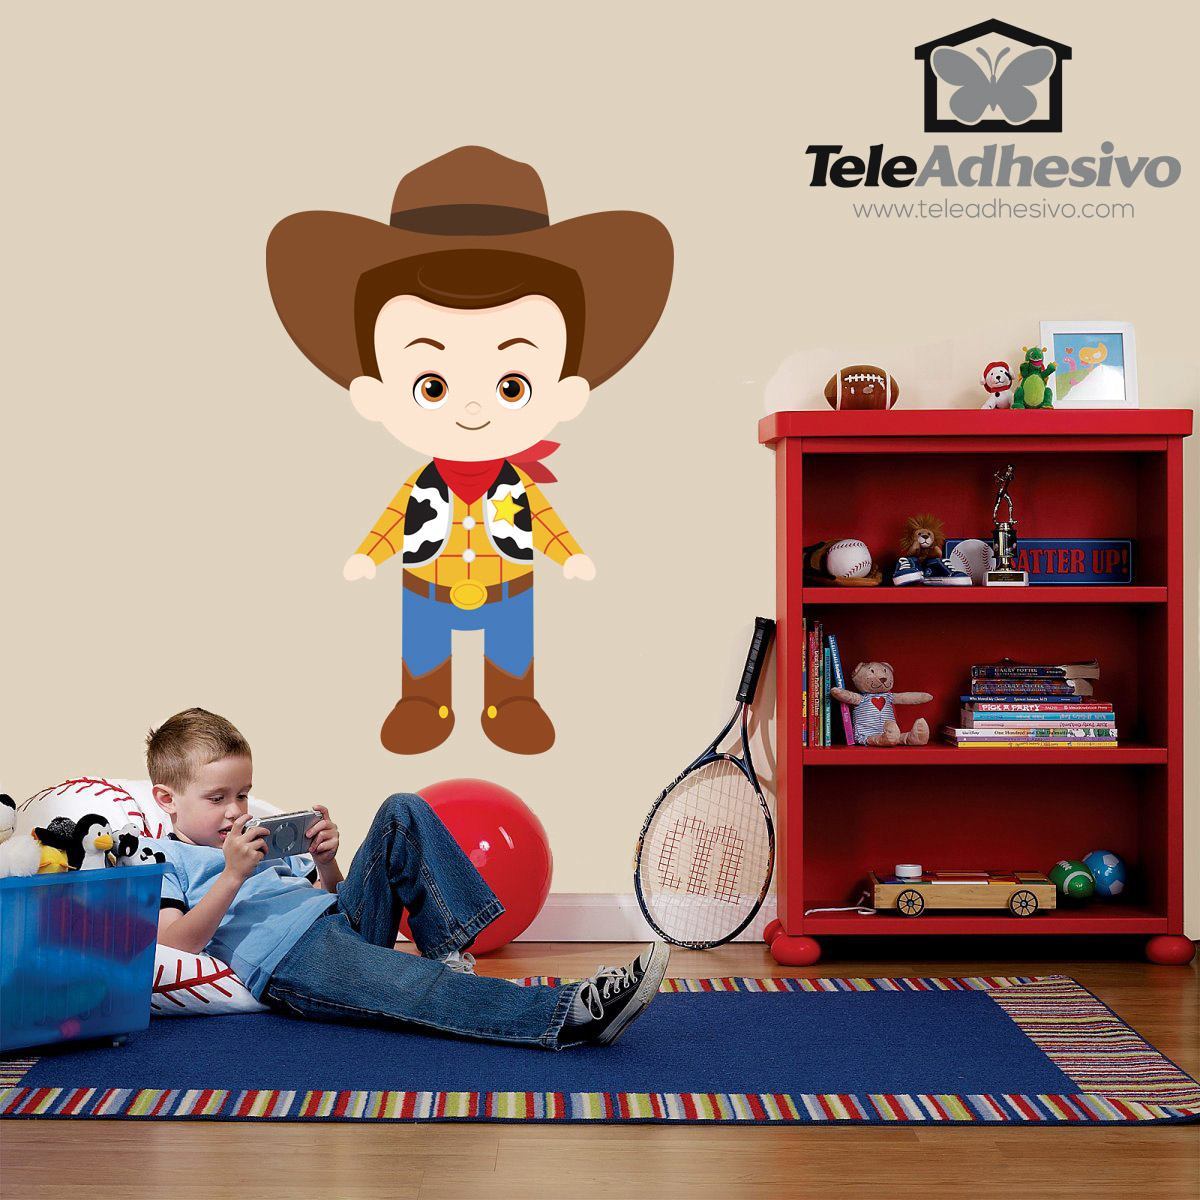 Stickers for Kids: Sheriff Woody, Toy Story